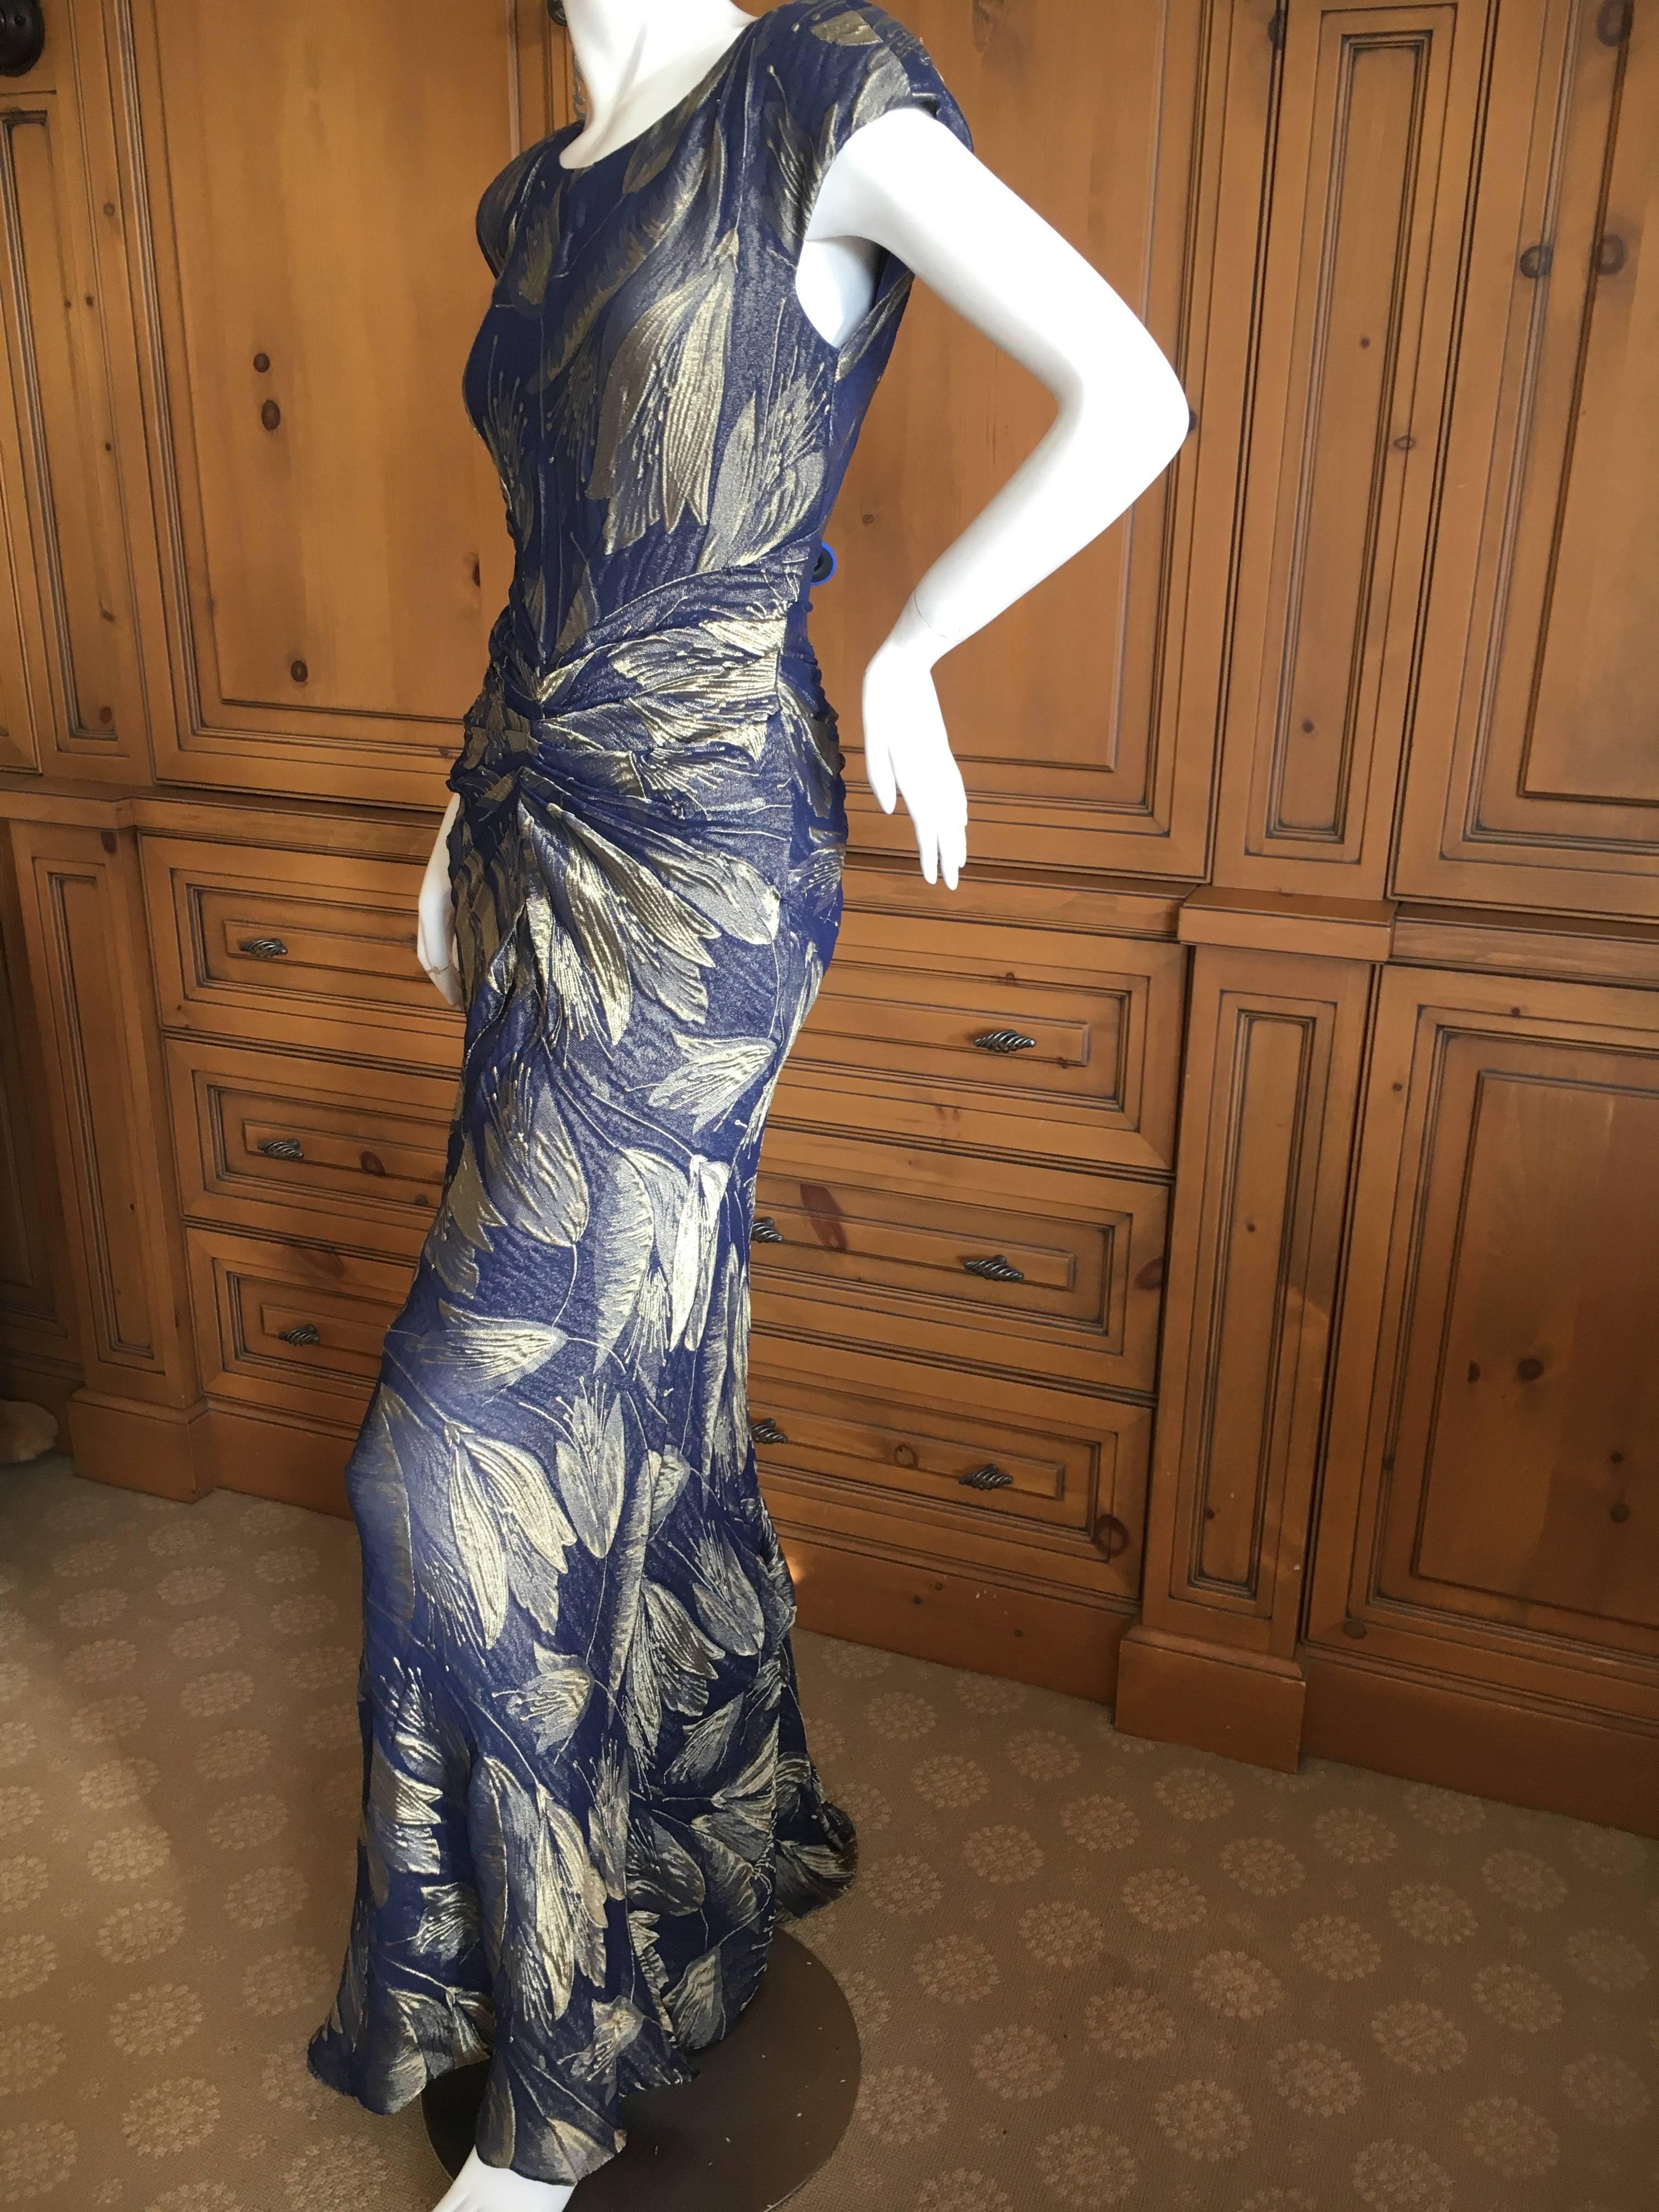 Christian Dior Vintage Golden Jacquard Tulip Print Evening Dress by Galliano.
Zips up the back.
Please use zoom feature to see, it is hard to photograph, but so pretty.
Slate or navy blue with golden thread jacquard in a stylized tulip pattern.
